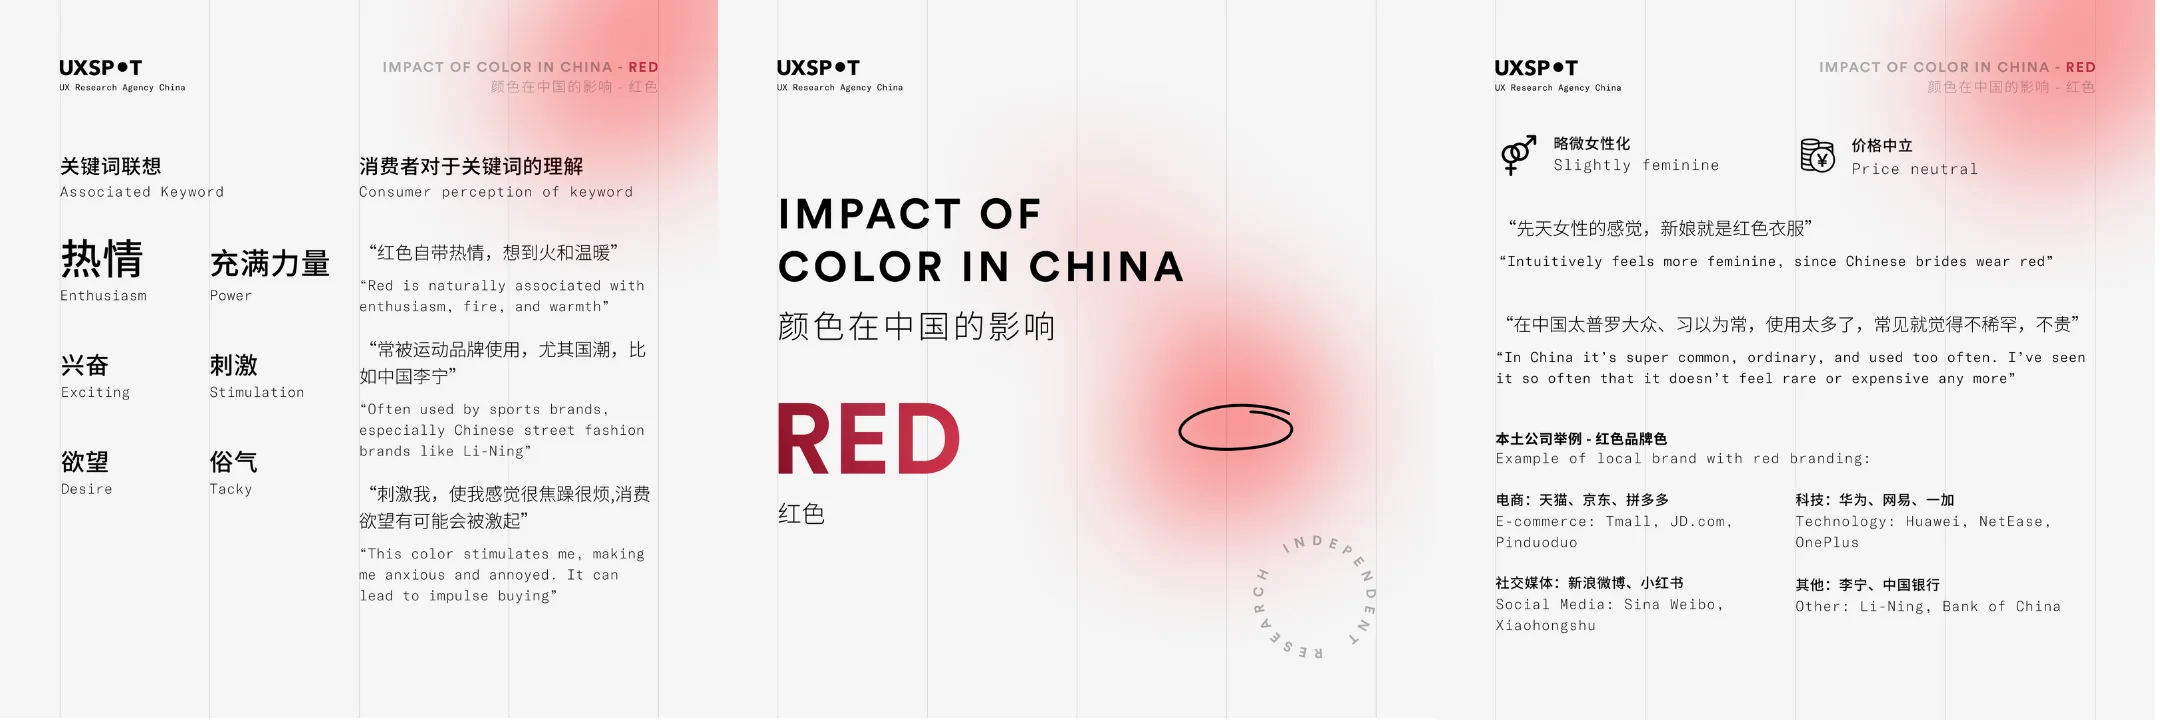 color psychology China color red data summary